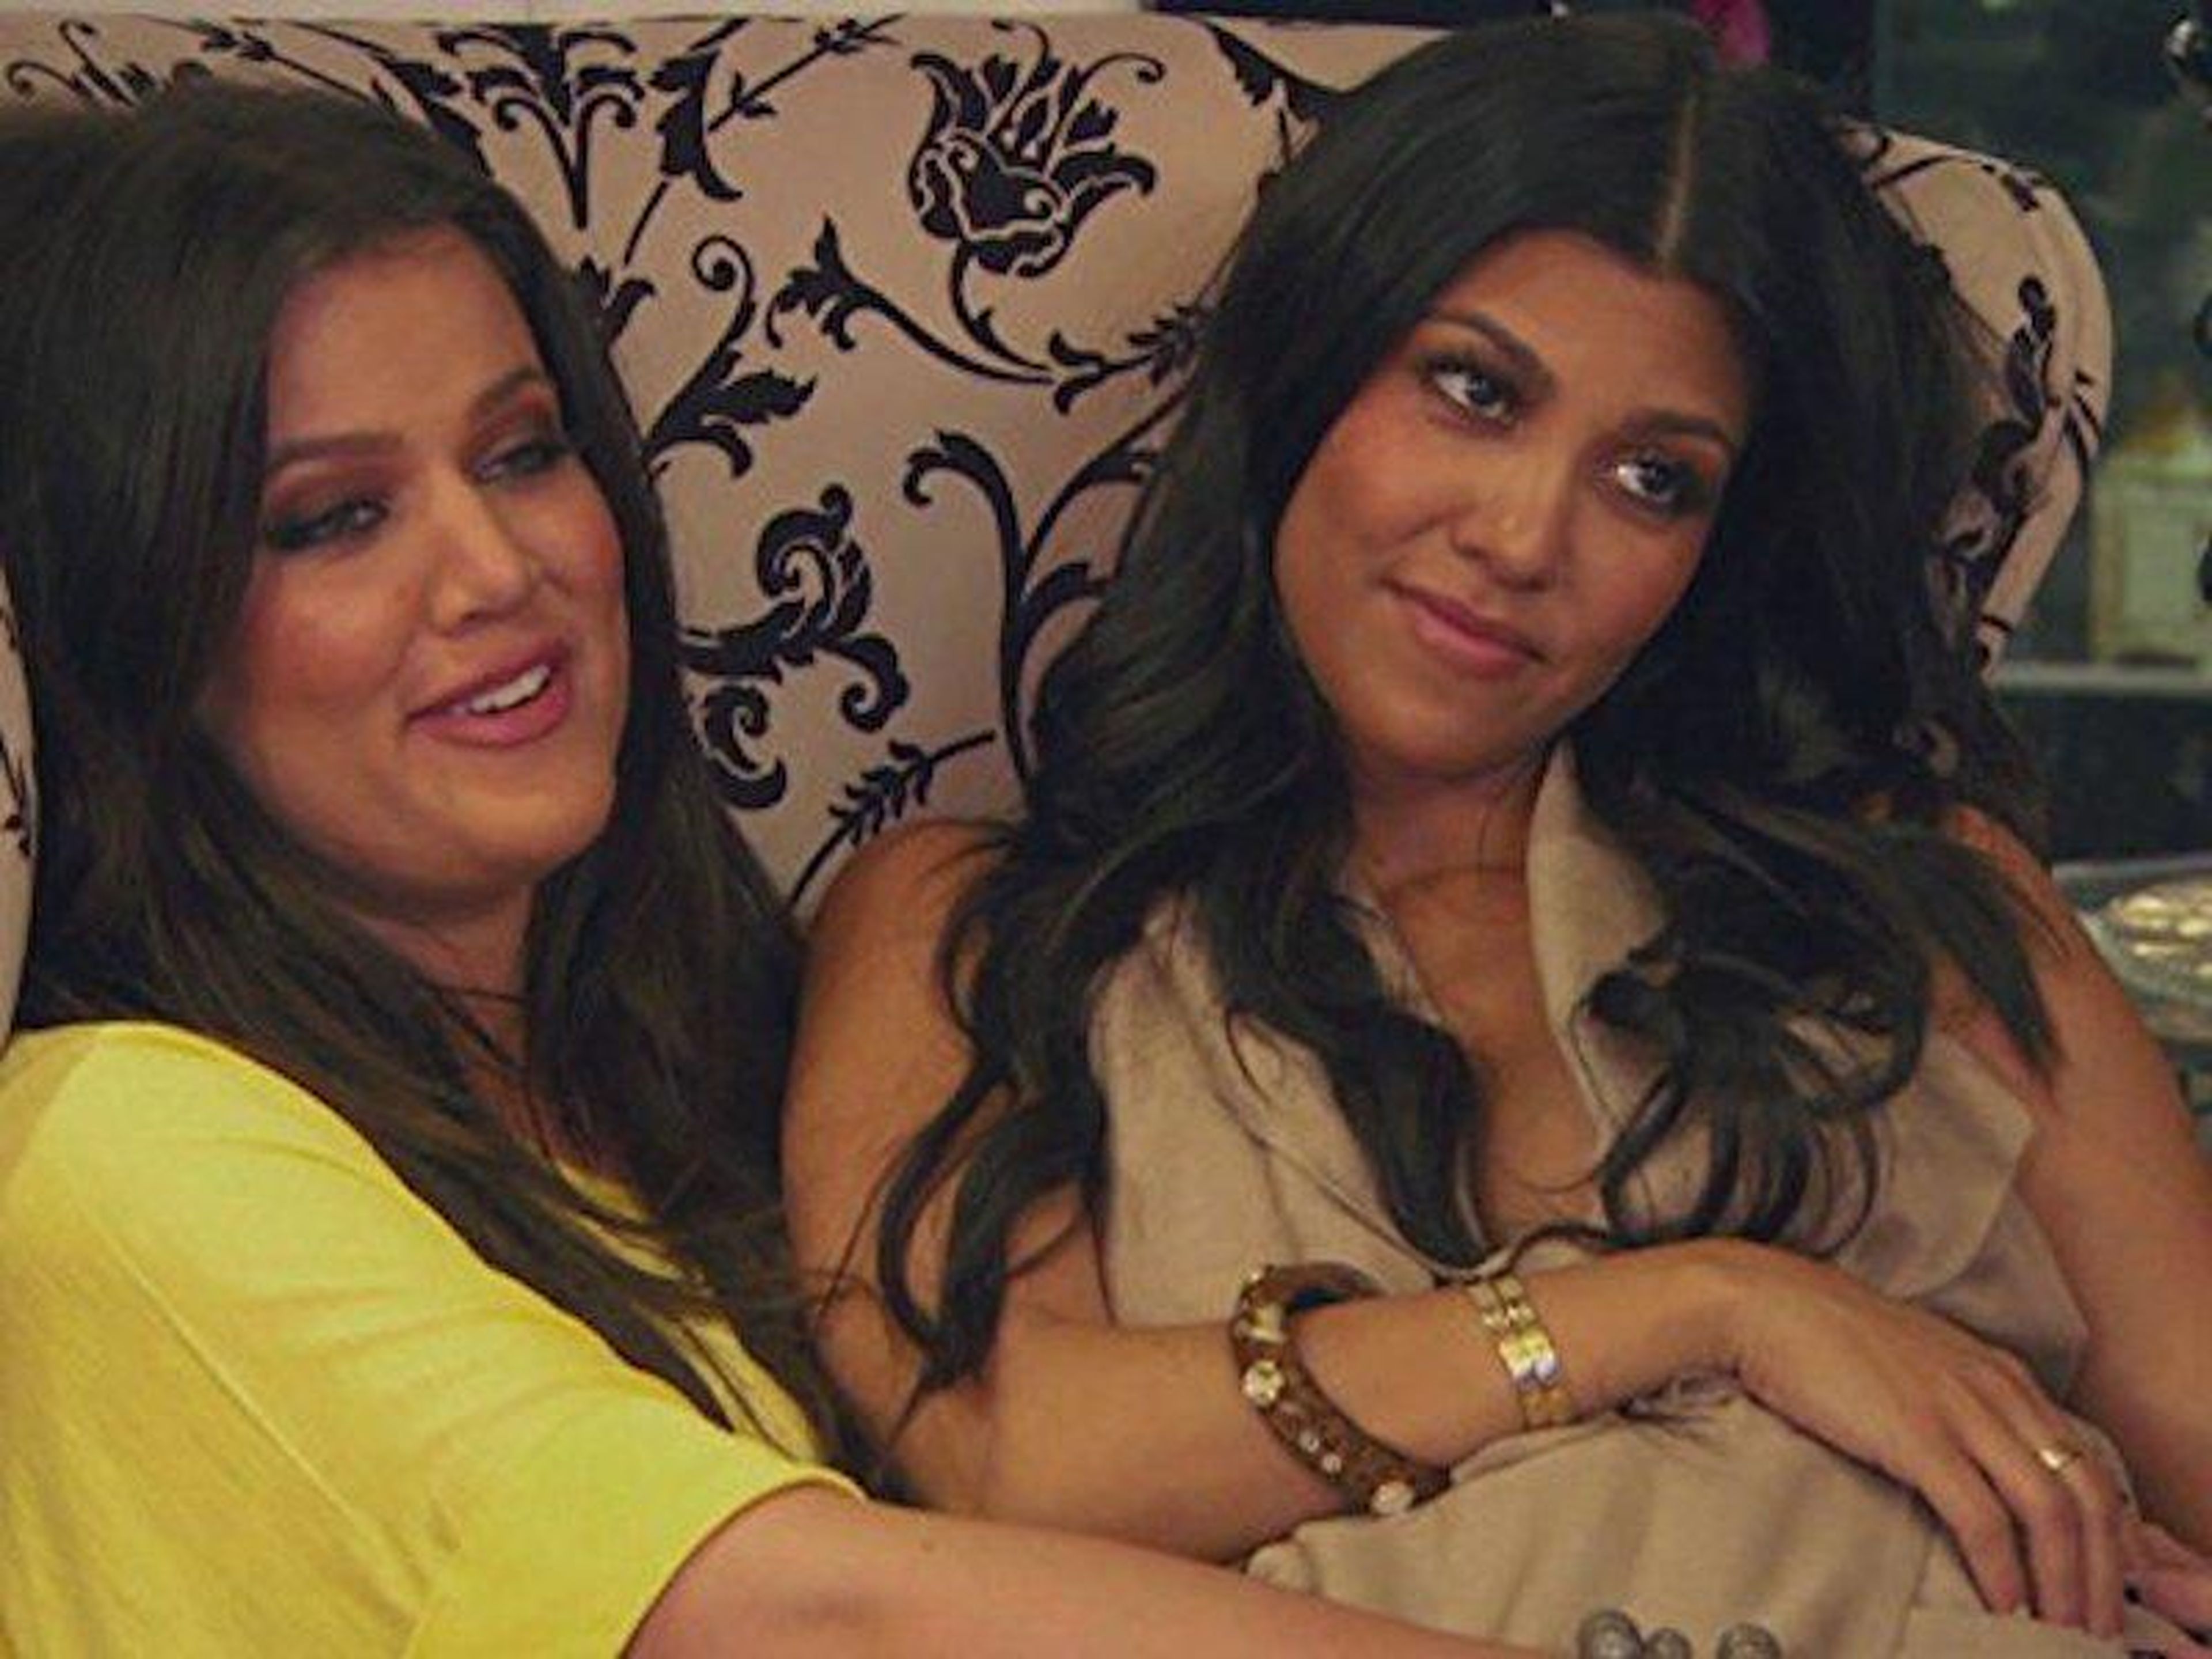 The series lasted for three seasons — but Khloe headlined season two instead of Kim, although Kim did appear in the season.